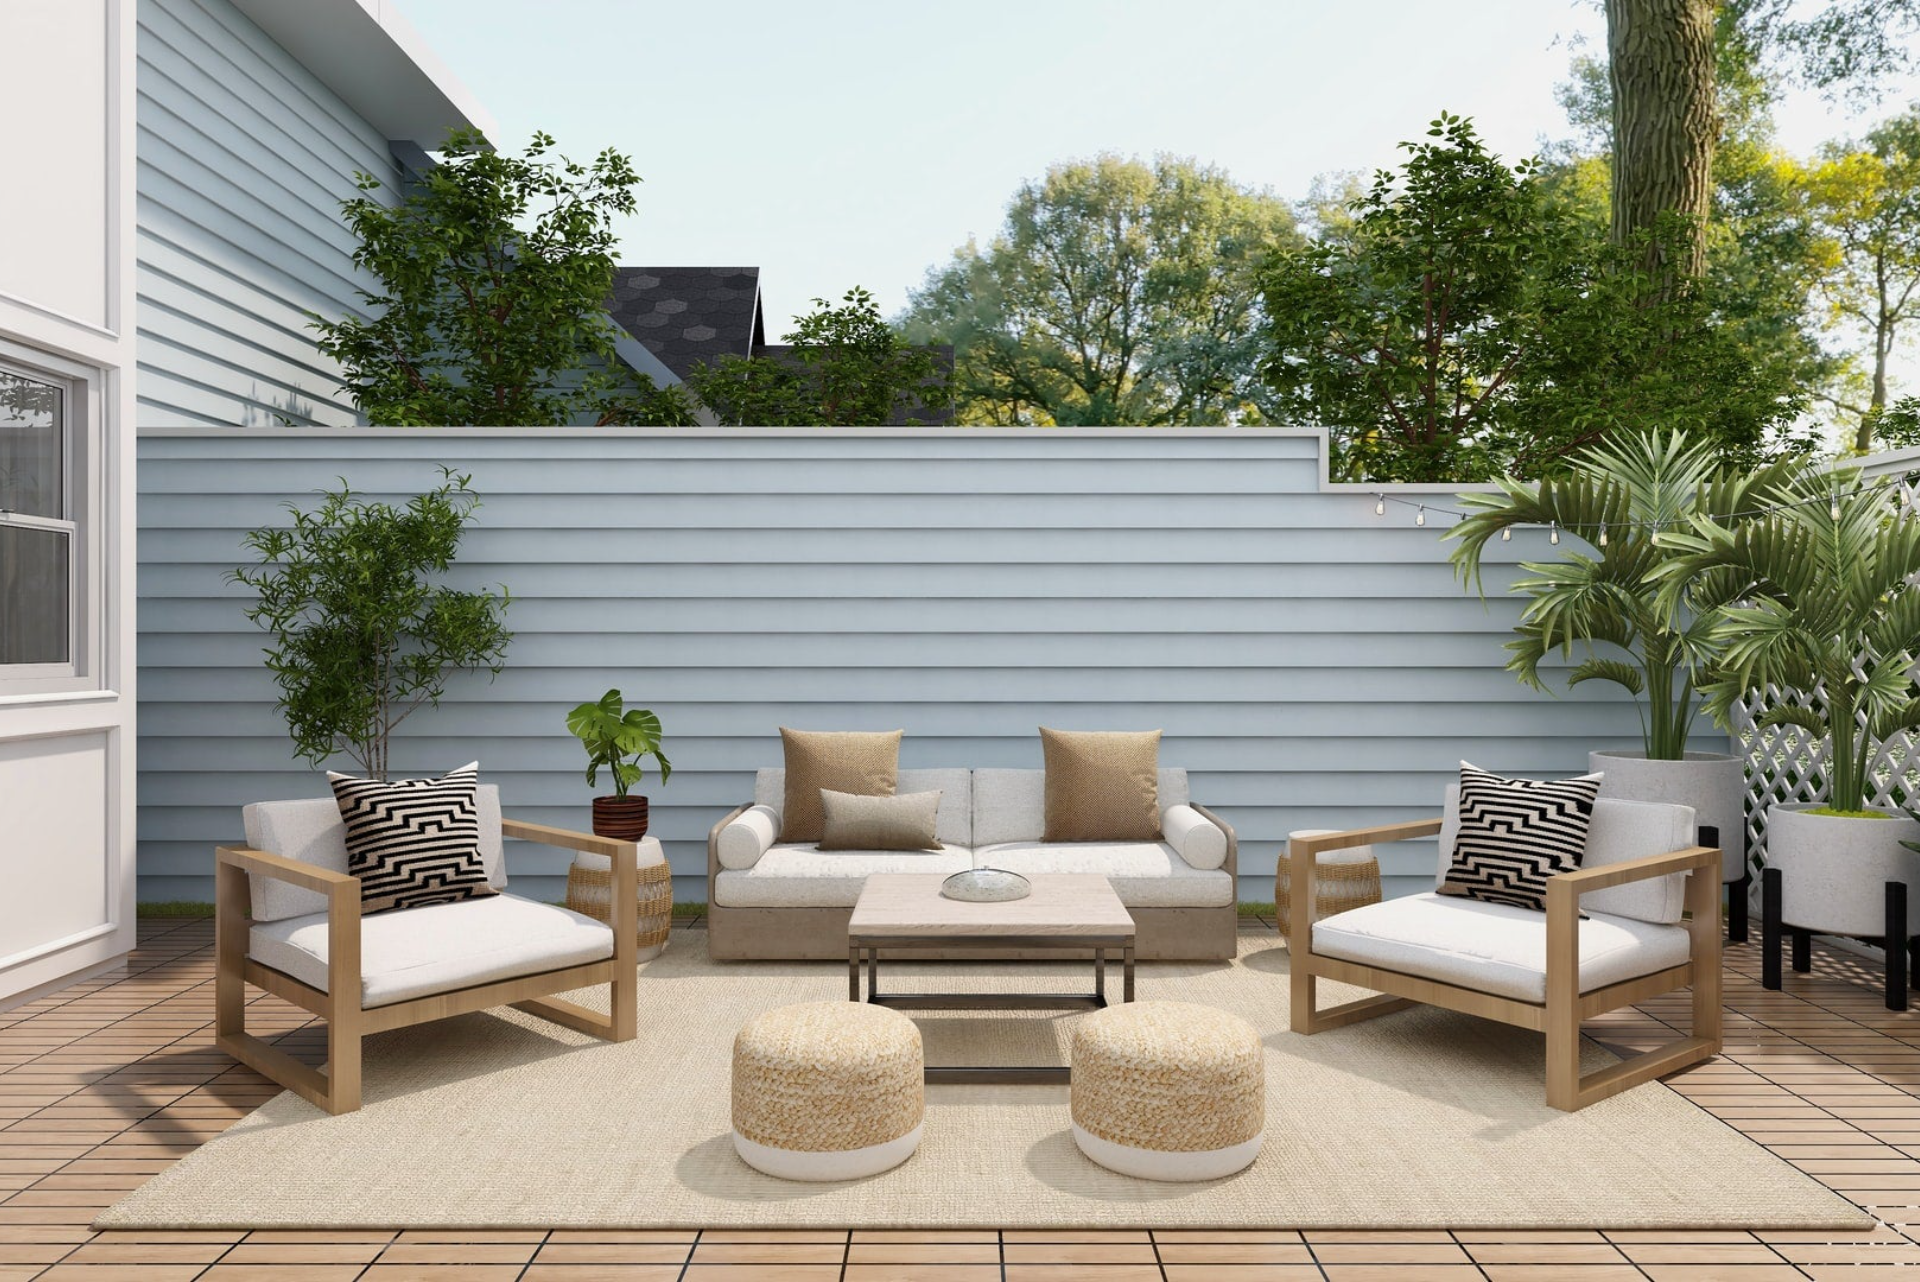 What Are the Best Outdoor Tile Options for a Deck or Patio?